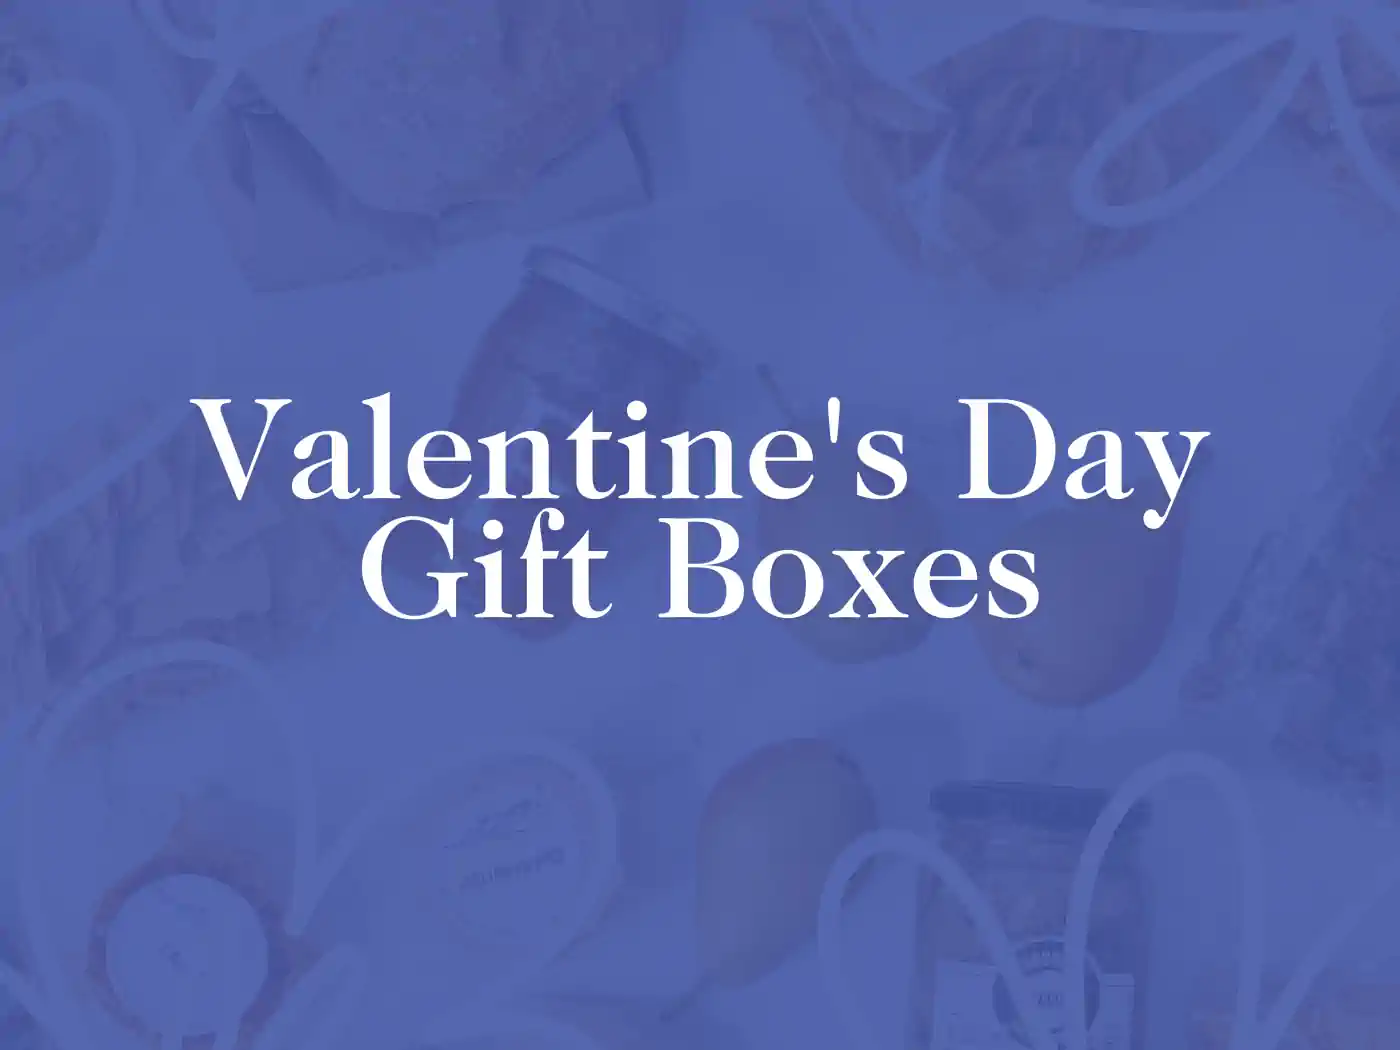 Promotional graphic for Valentine's Day Gift Boxes featuring a blue background with subtle holiday-themed elements. Fabulous Flowers and Gifts.